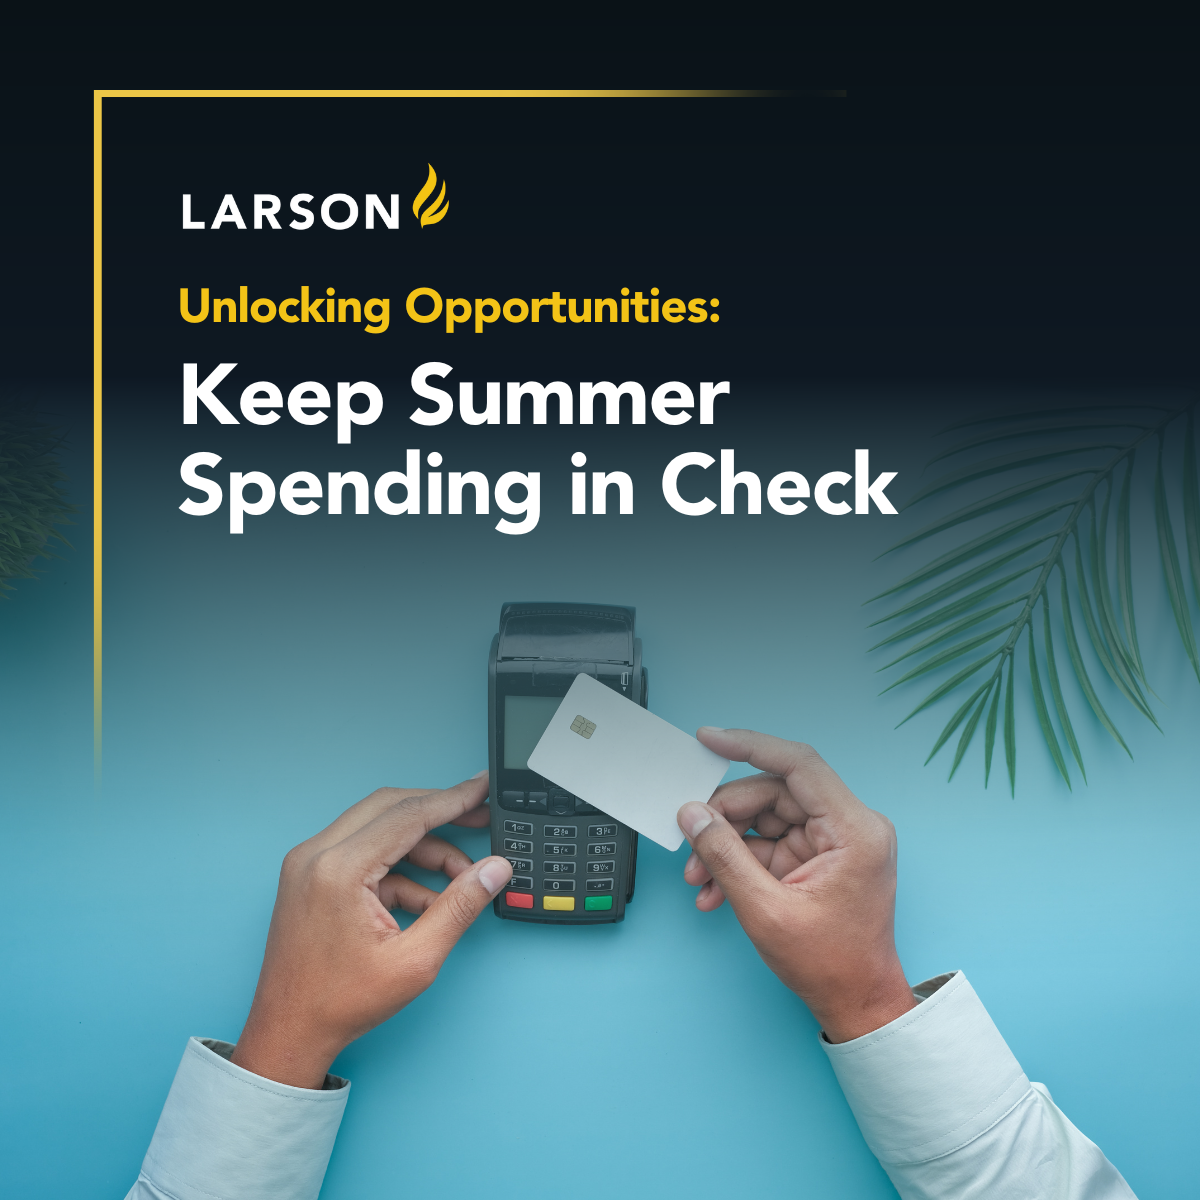 With interest rates expected to remain elevated compared to pre-pandemic levels, here's some tips on keeping summer spending in check for financial success.